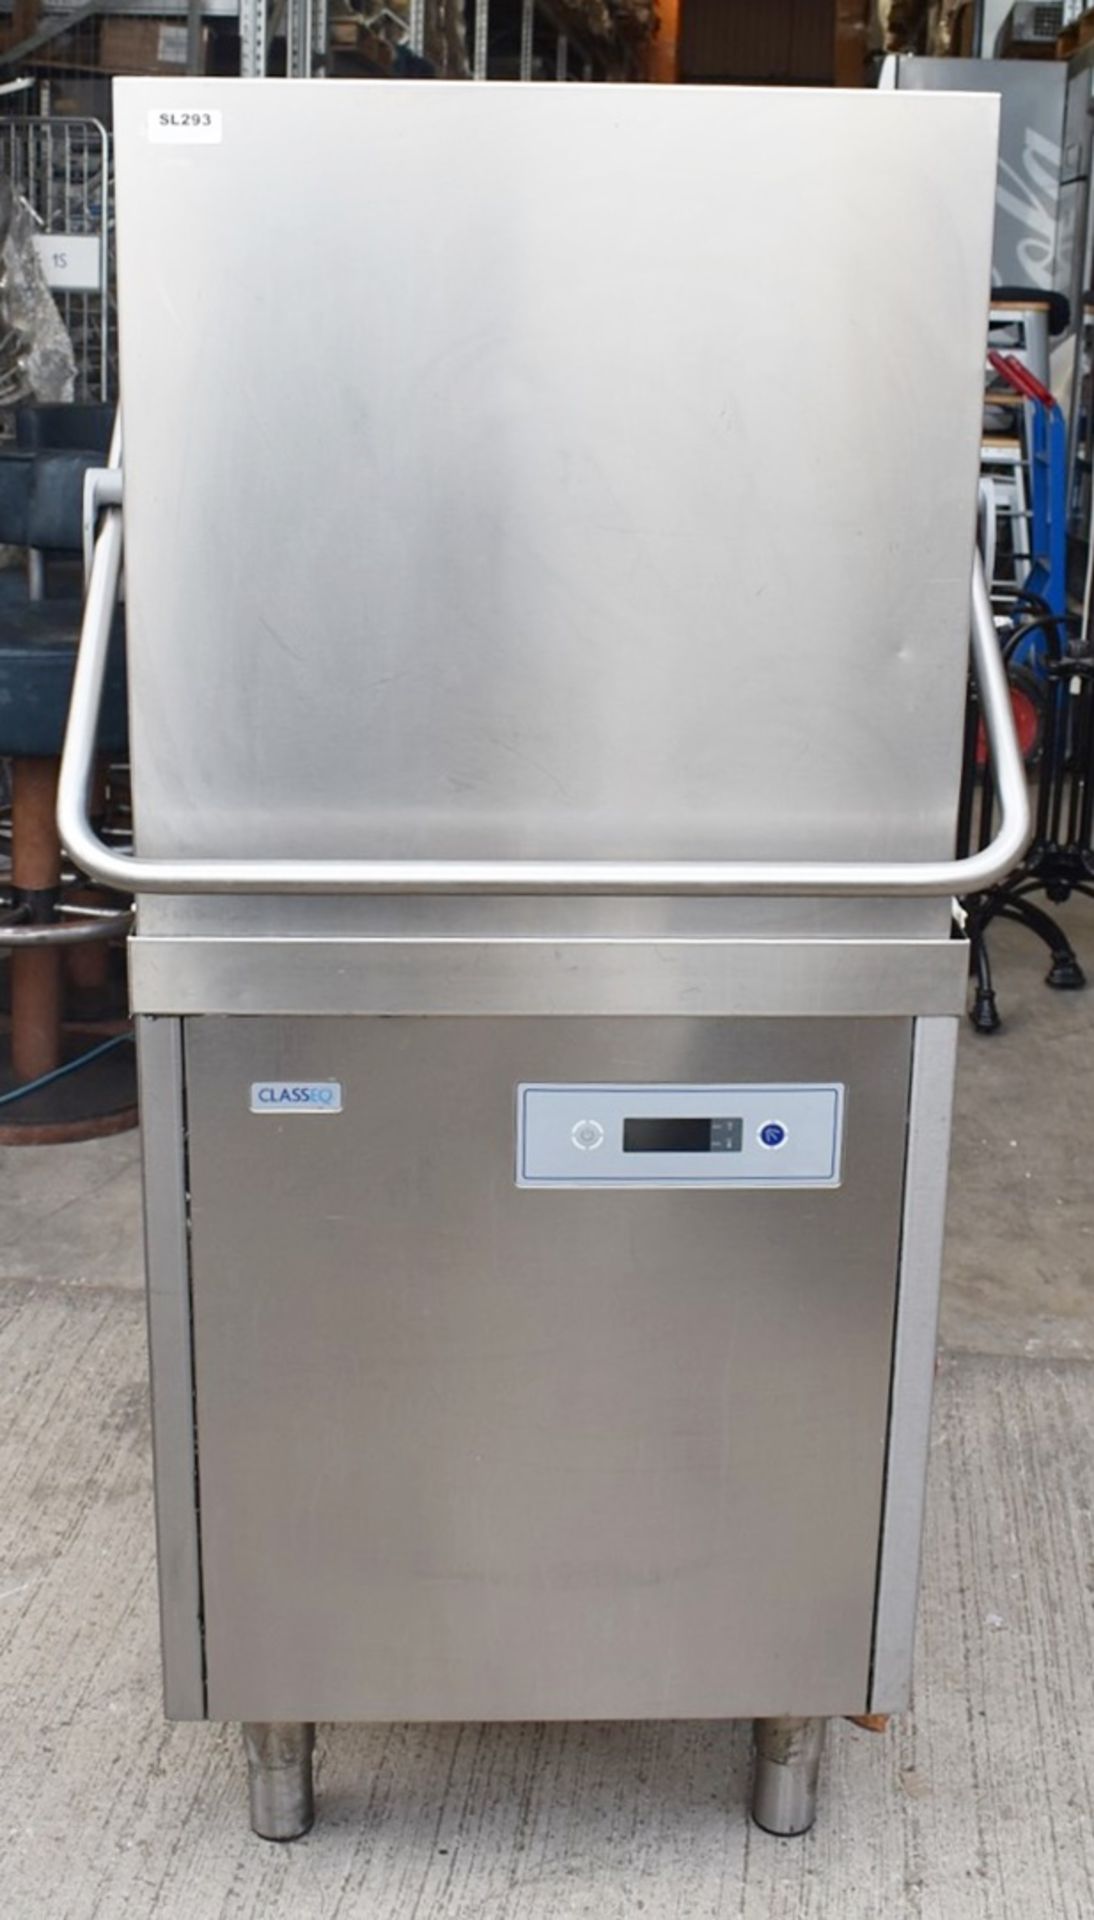 1 x Classeq Passthrough Dishwasher - Model P500AWS - Includes Outlet Table -  3 Phase - Recently